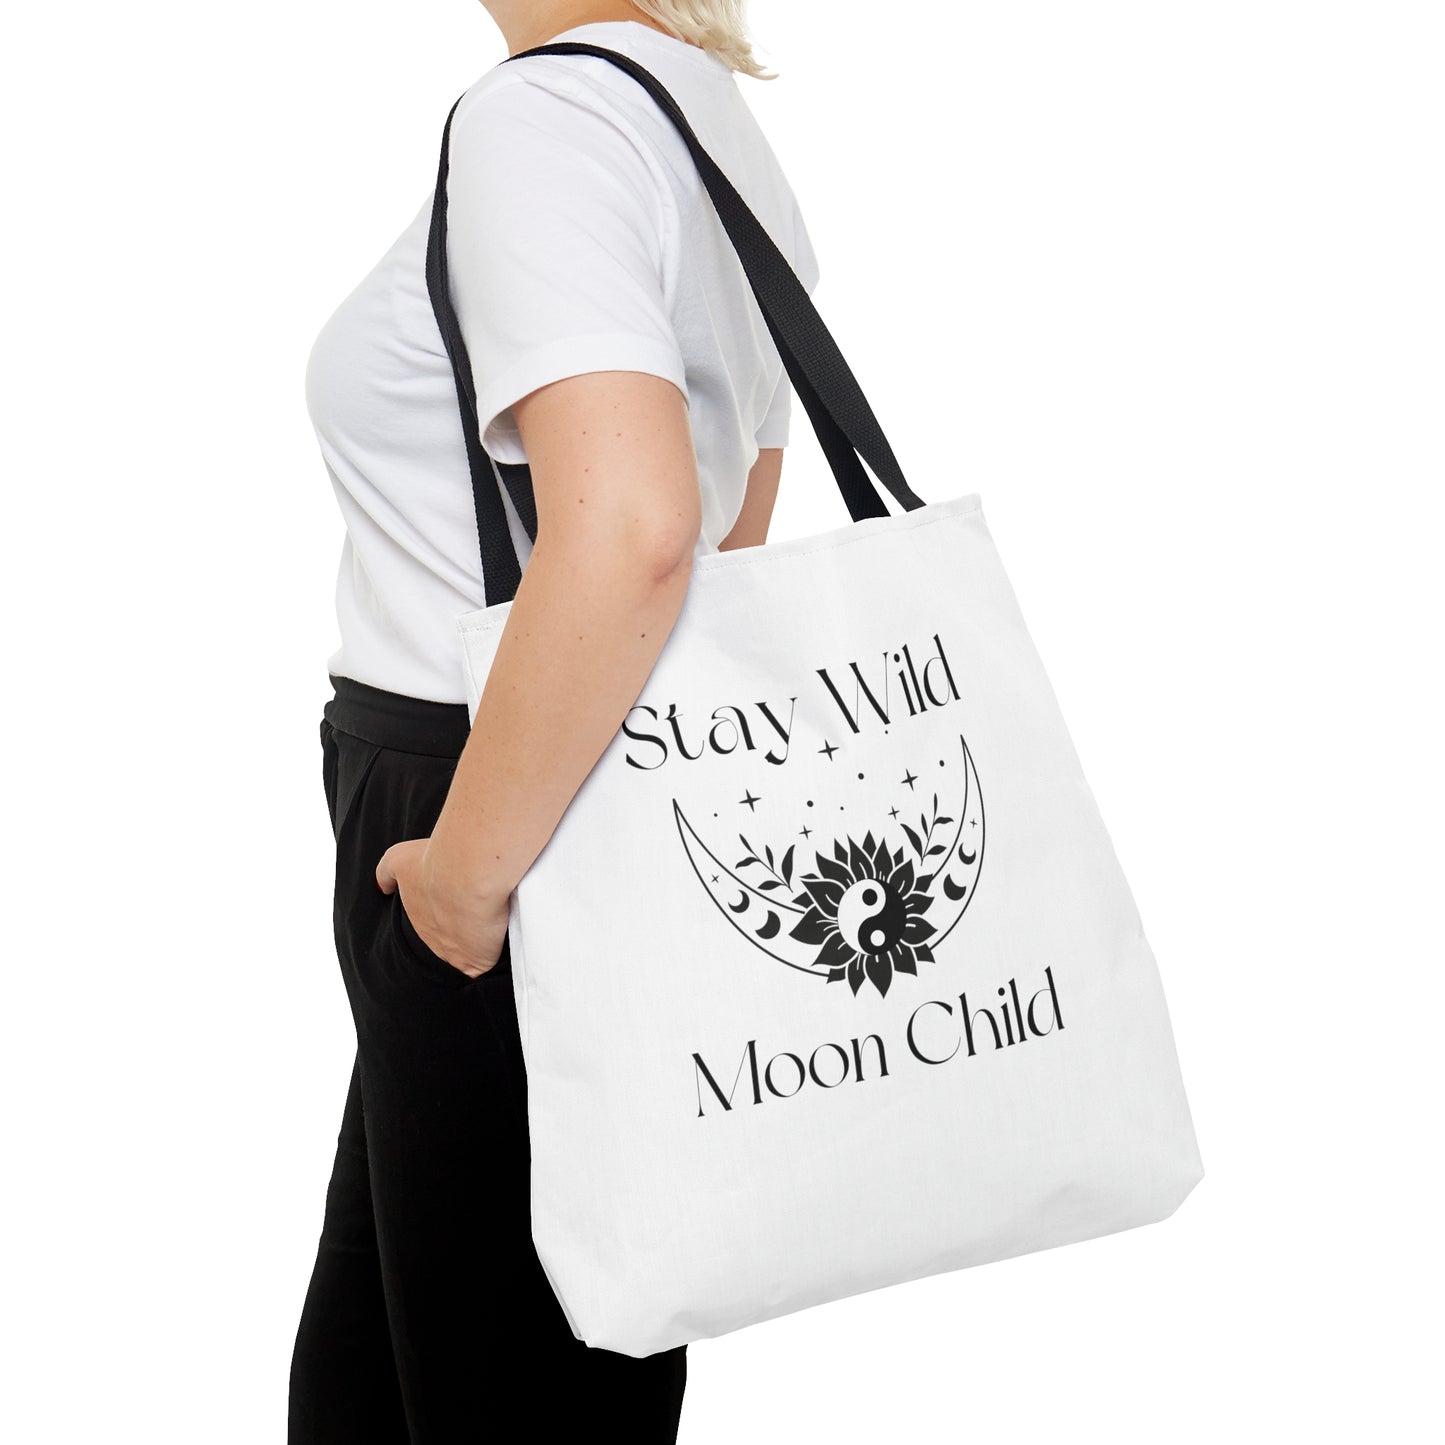 Stay wild moon child travel tote Bag, trendy tote bag, work tote bag, books tote bag